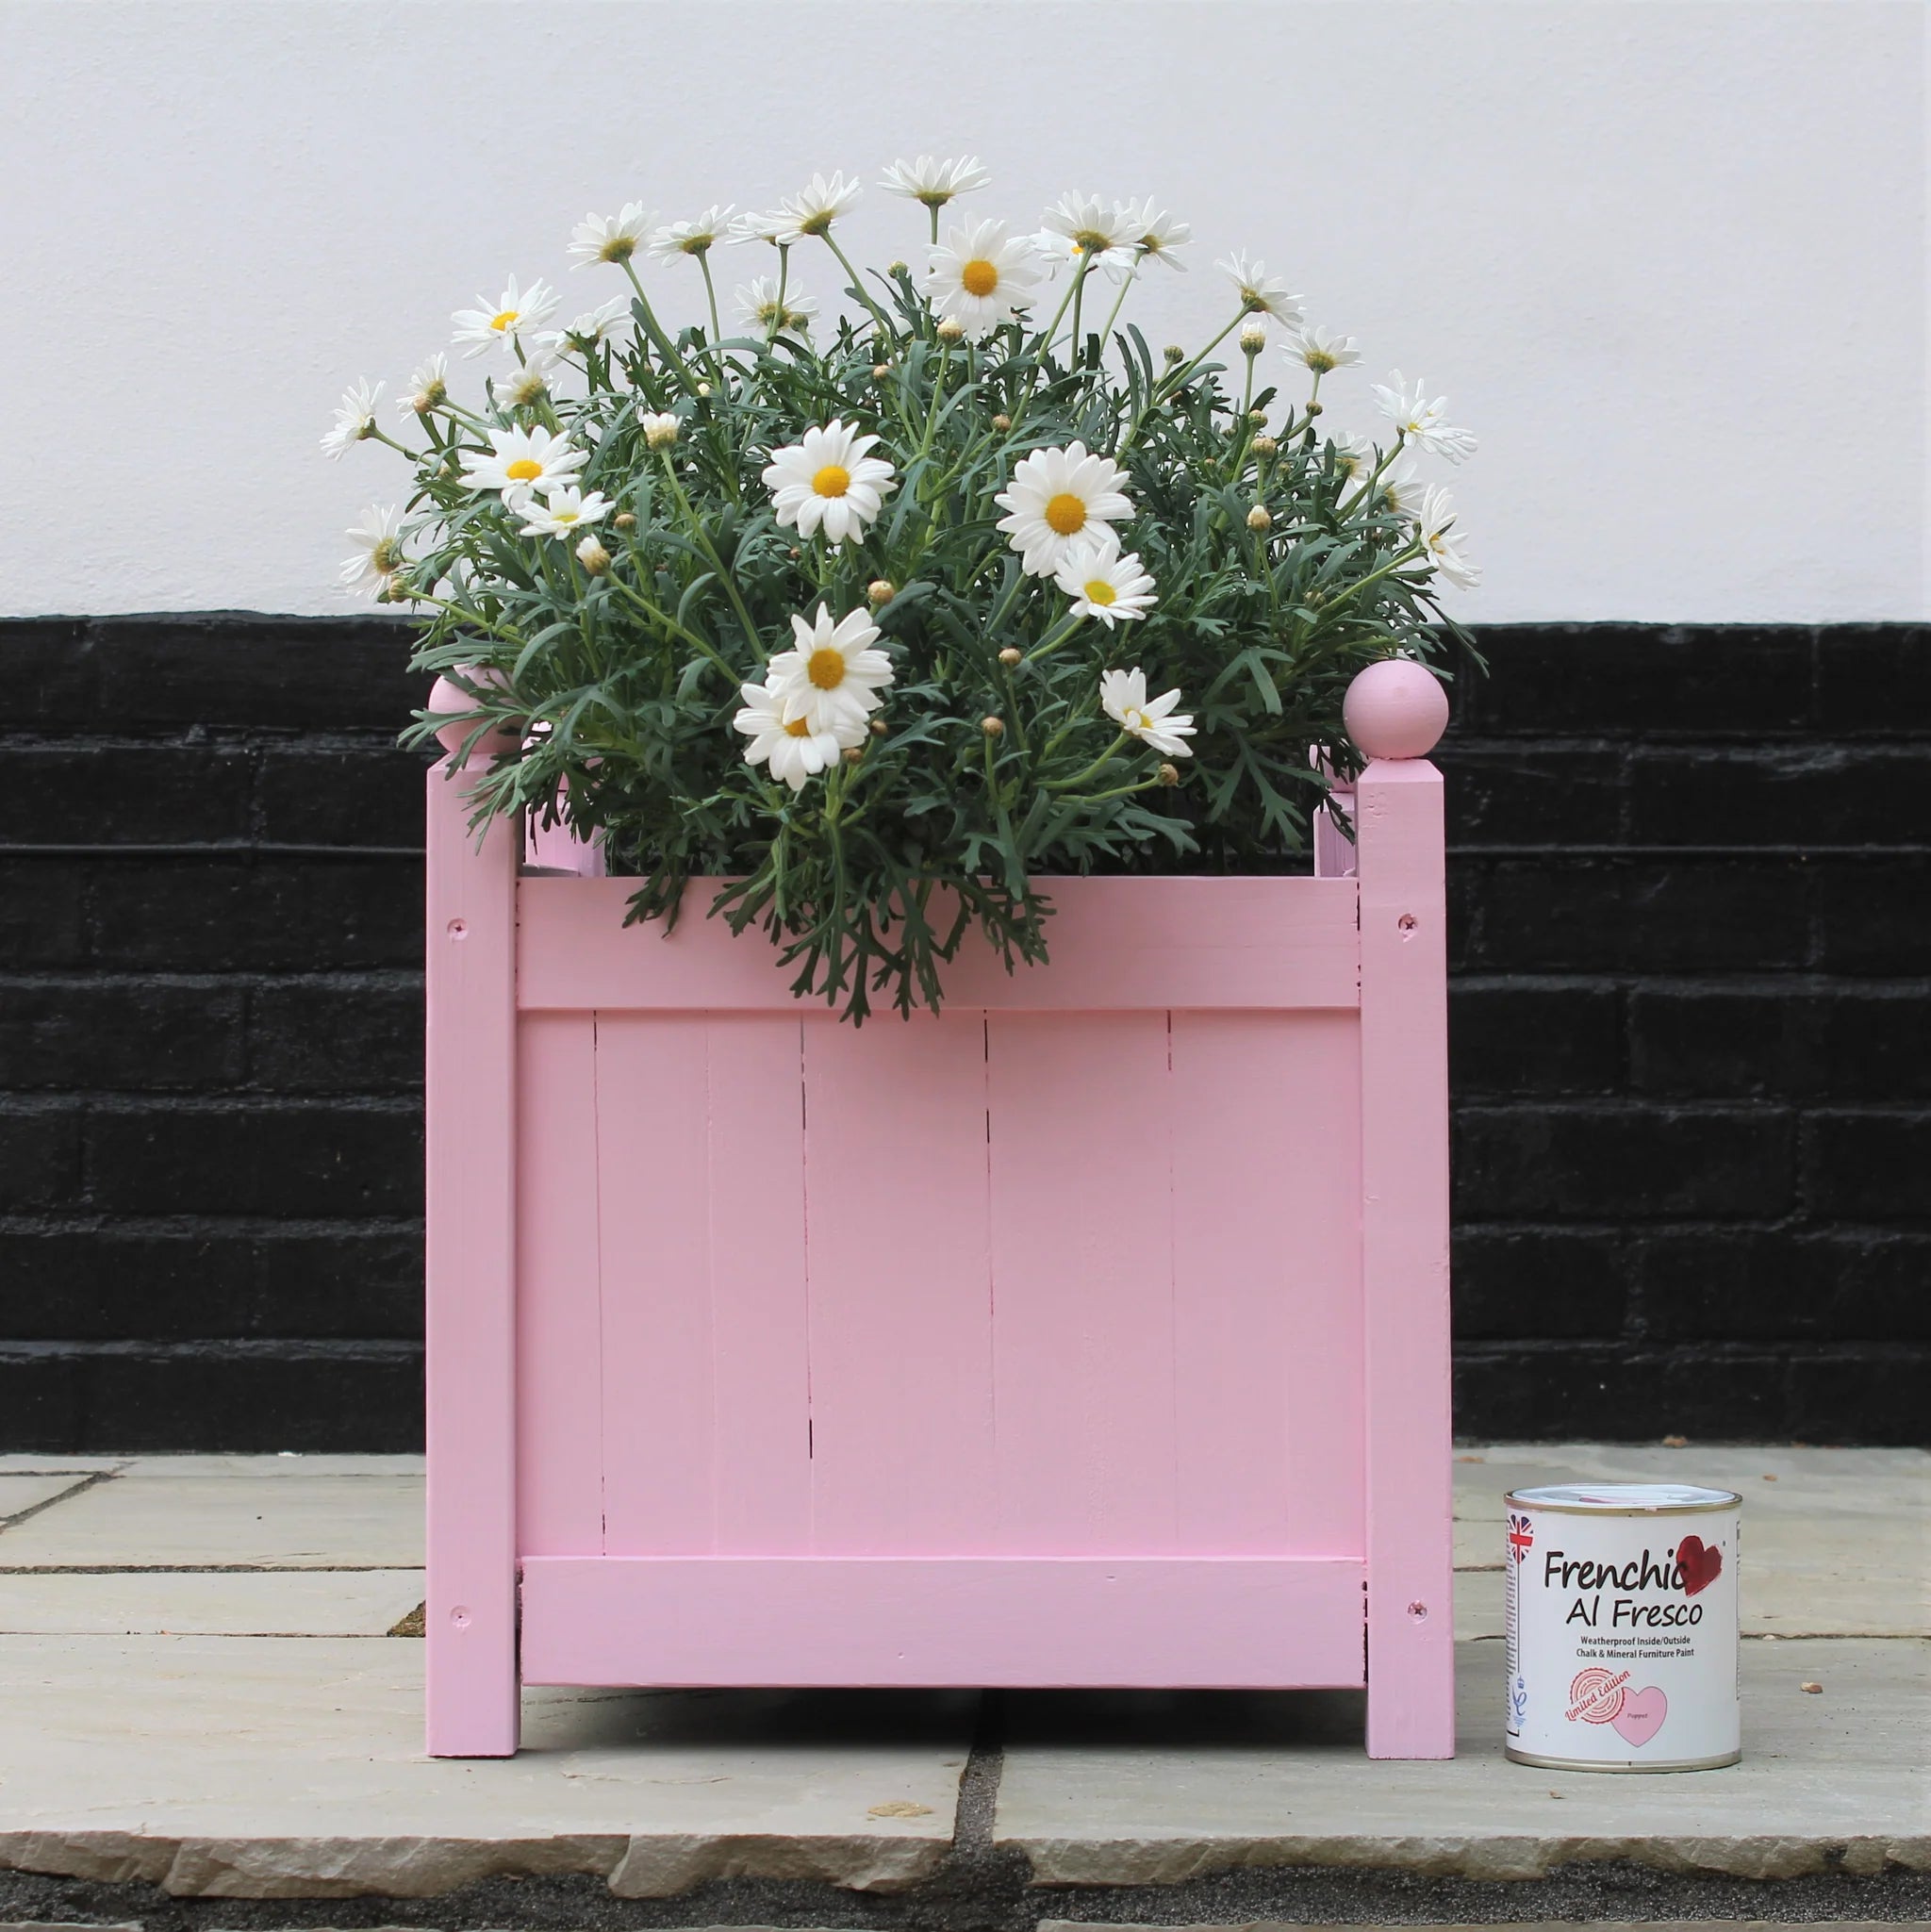 Frenchic Paint | Poppet Al Fresco Limited Edition by Weirs of Baggot Street